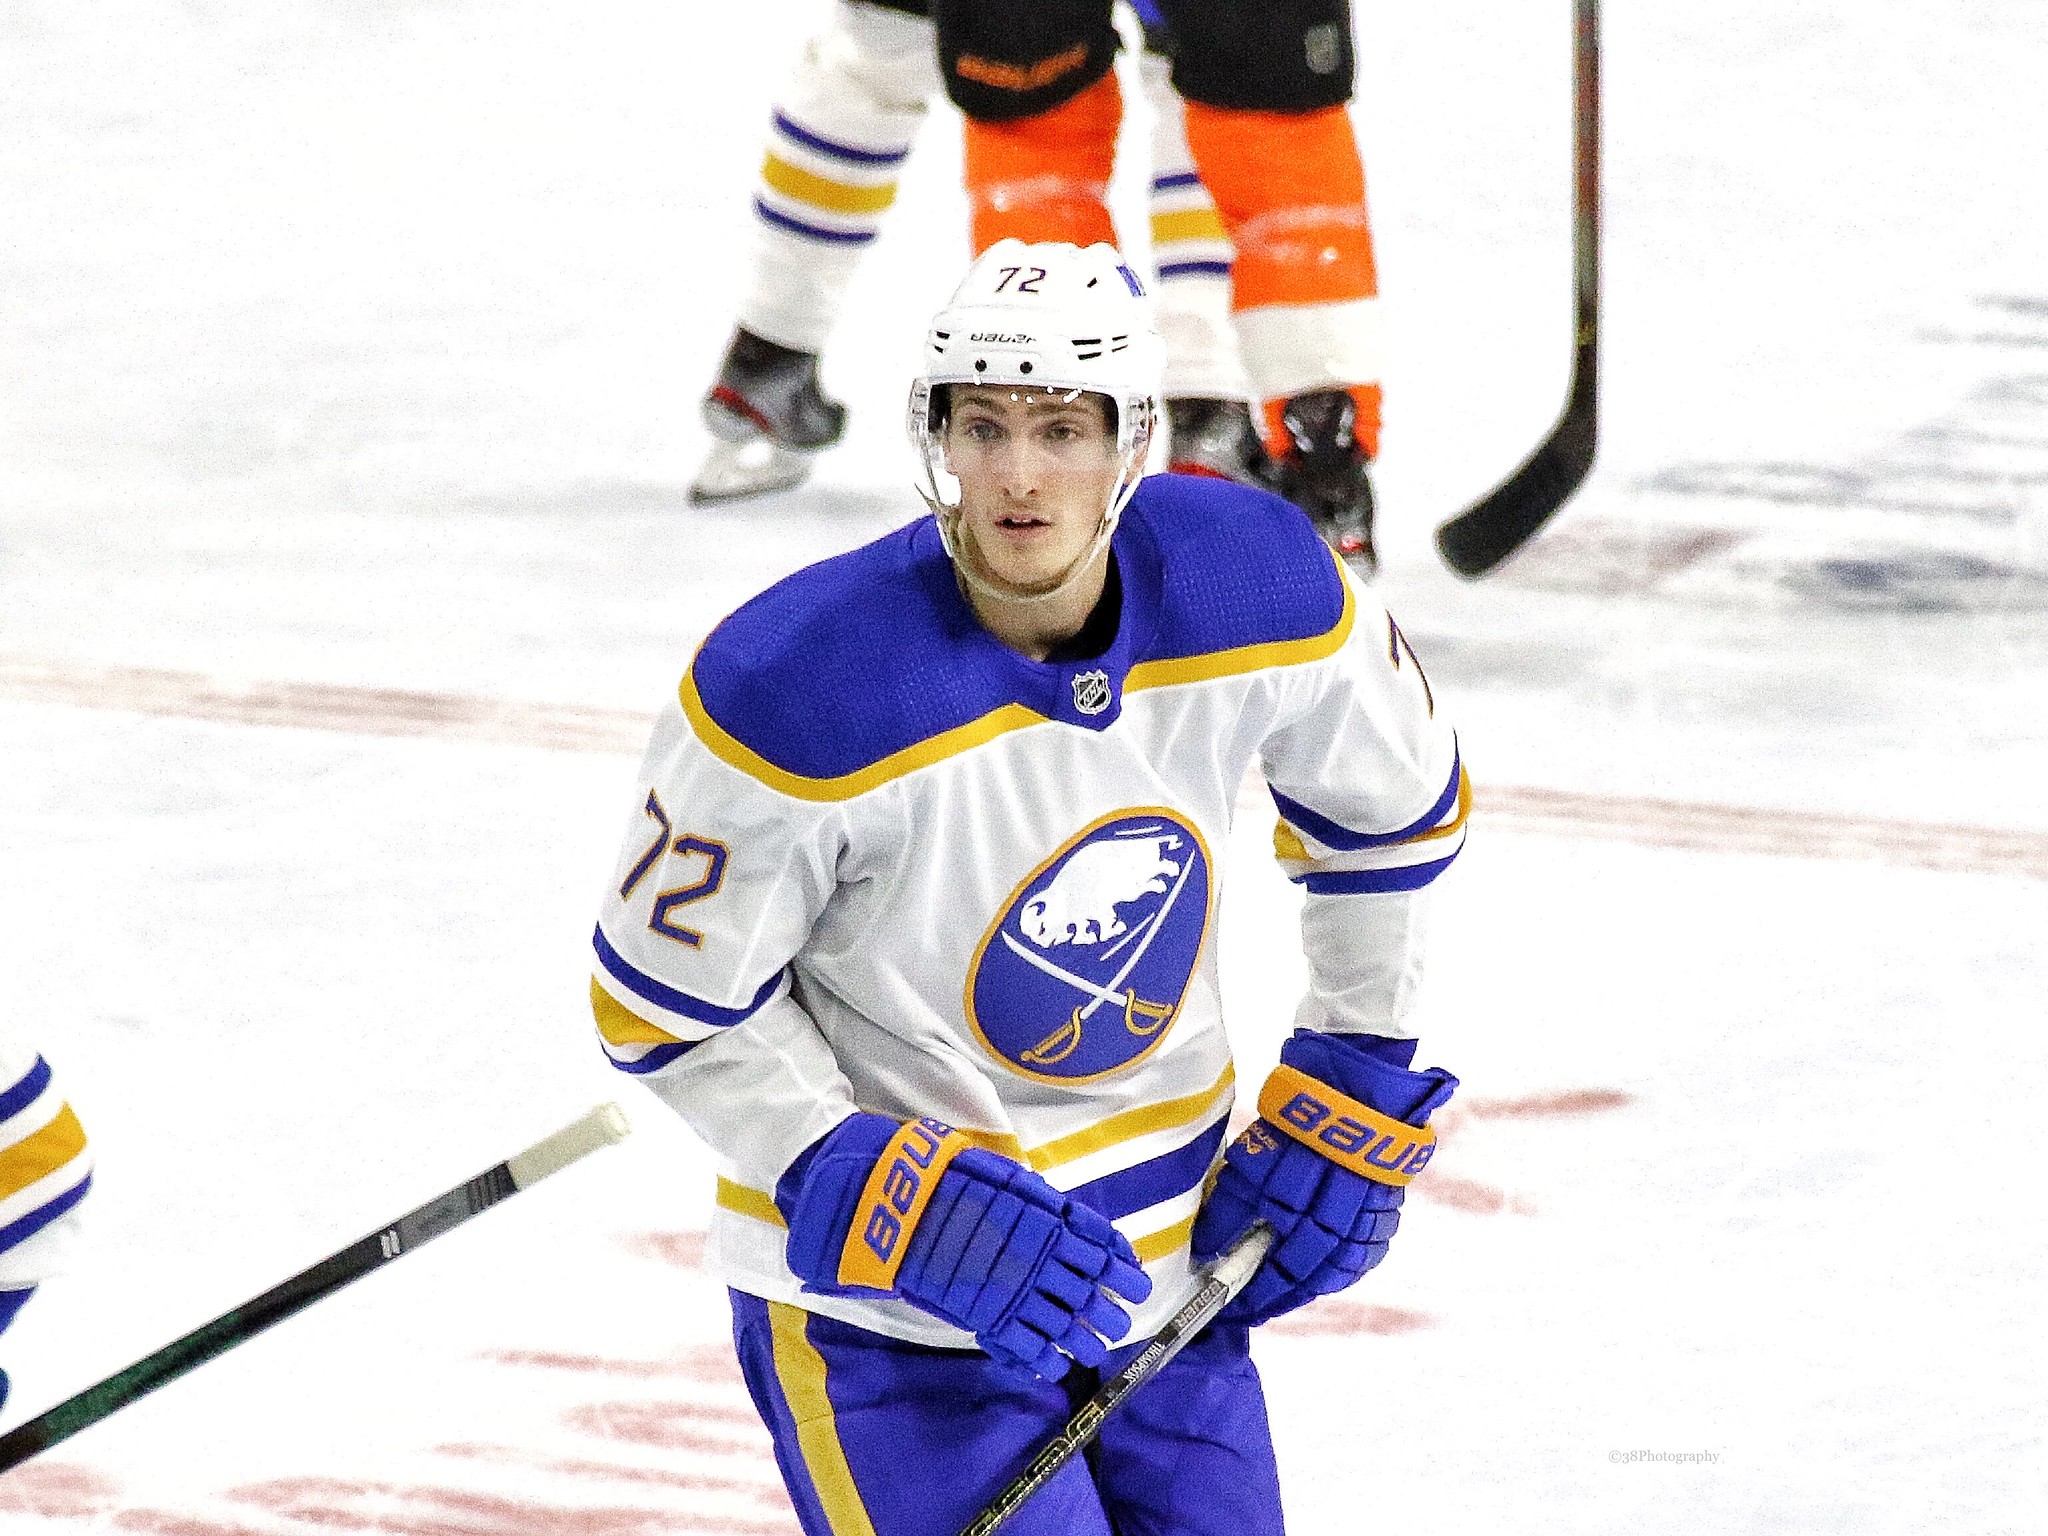 Buffalo Sabres center Tage Thompson wears a special warmup jersey